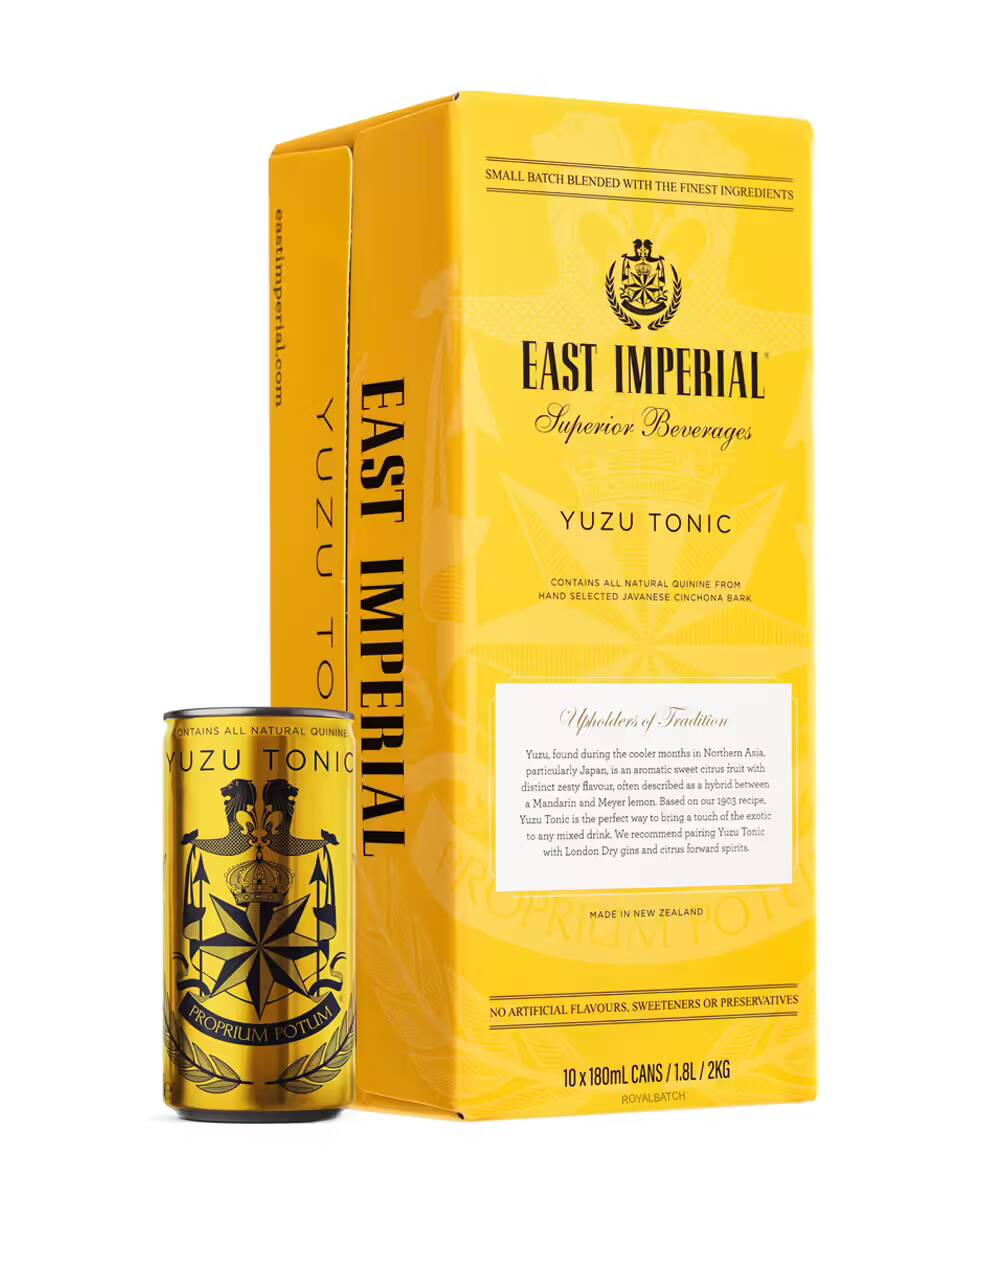 East Imperial Superior Beverages Yuzu Tonic (10 PACK) 6.1 FL OZ CANS